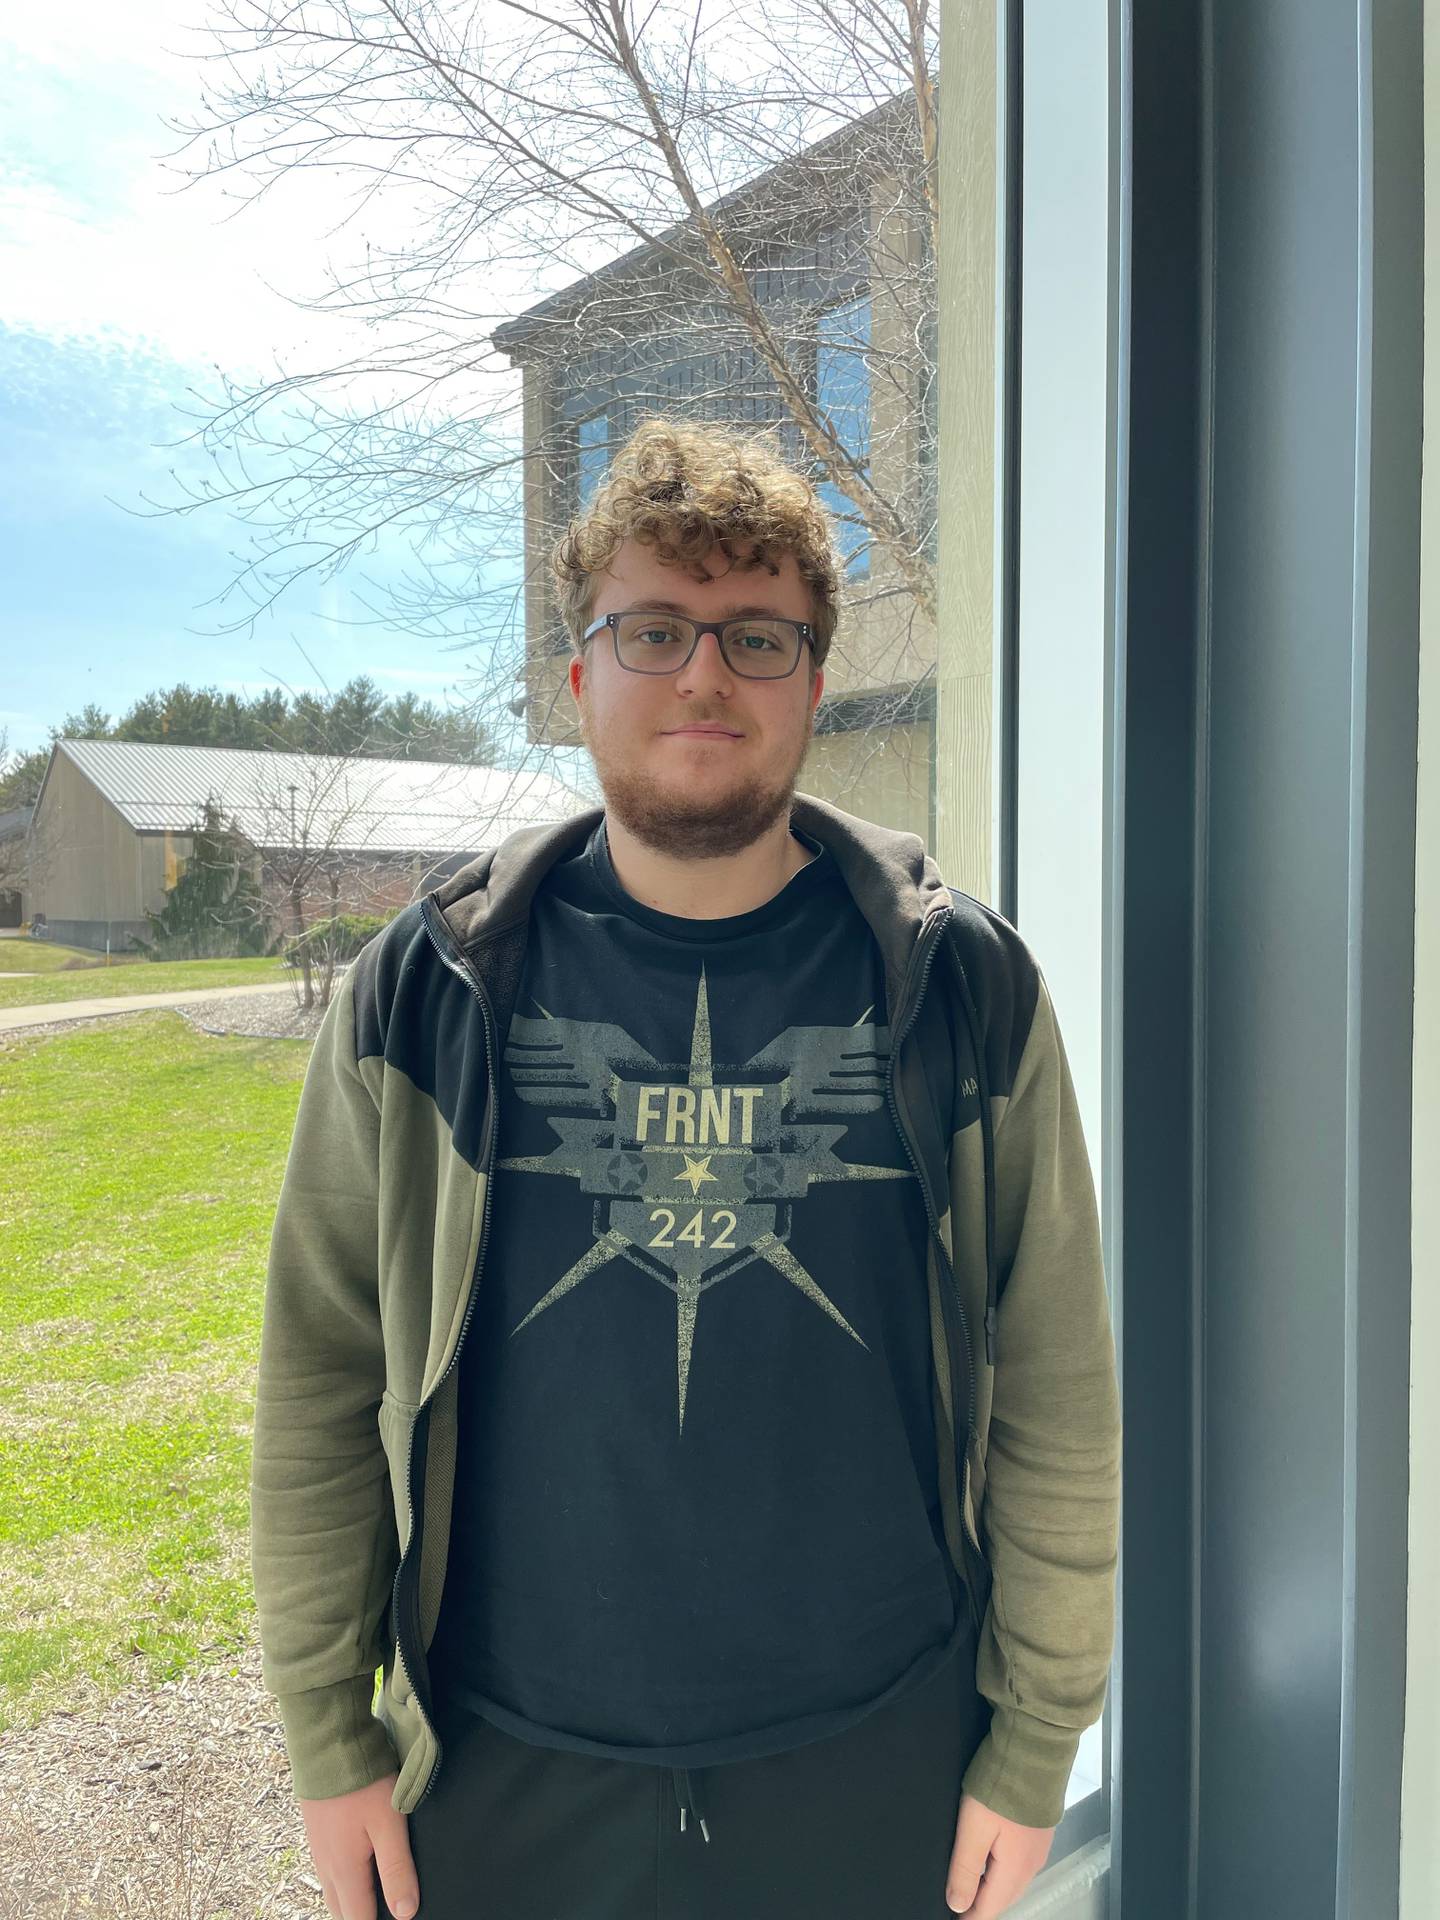 Social science major Riker Fesperman, the fifth IVCC student participant, is heading overseas to Salzburg, Austria for over two weeks to study German, Austrian culture, and history.